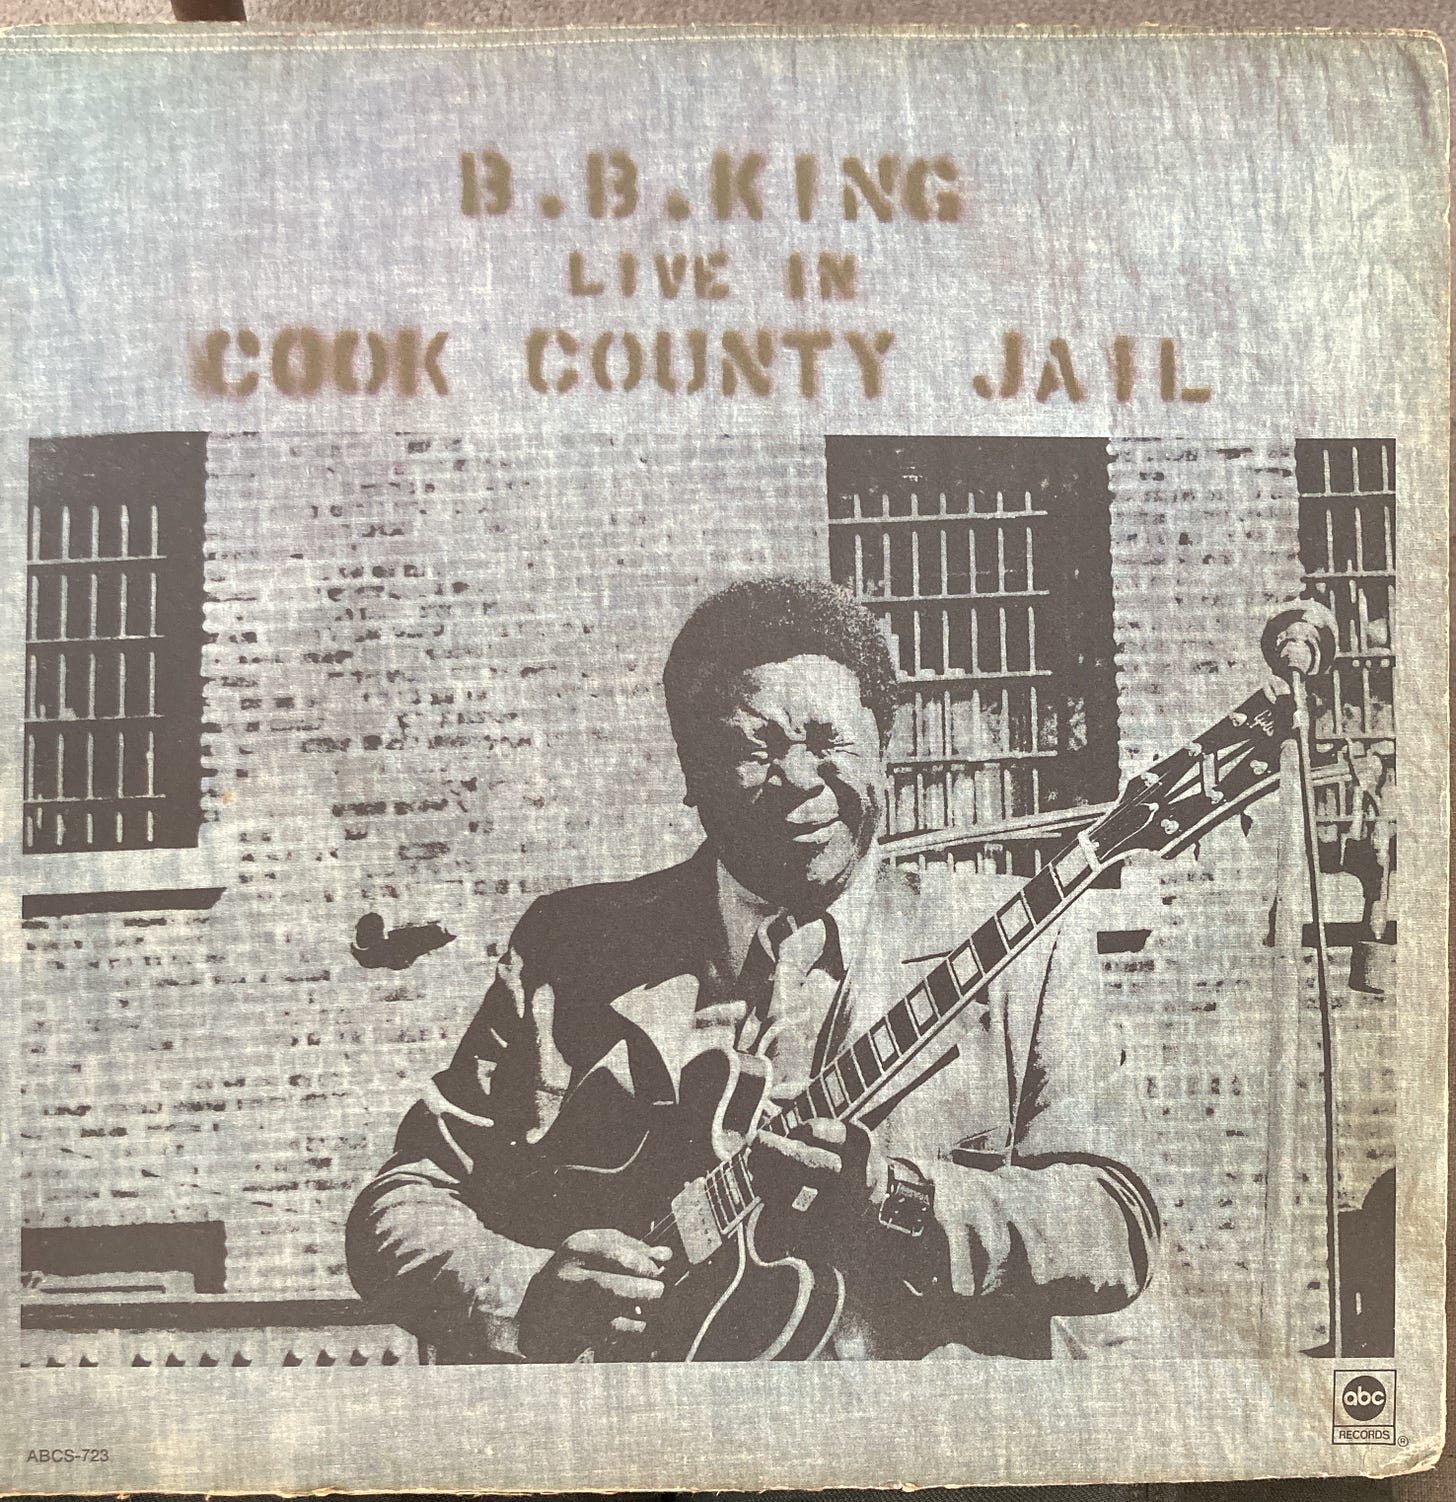 BB King Live in Cook County Jail Album Cover